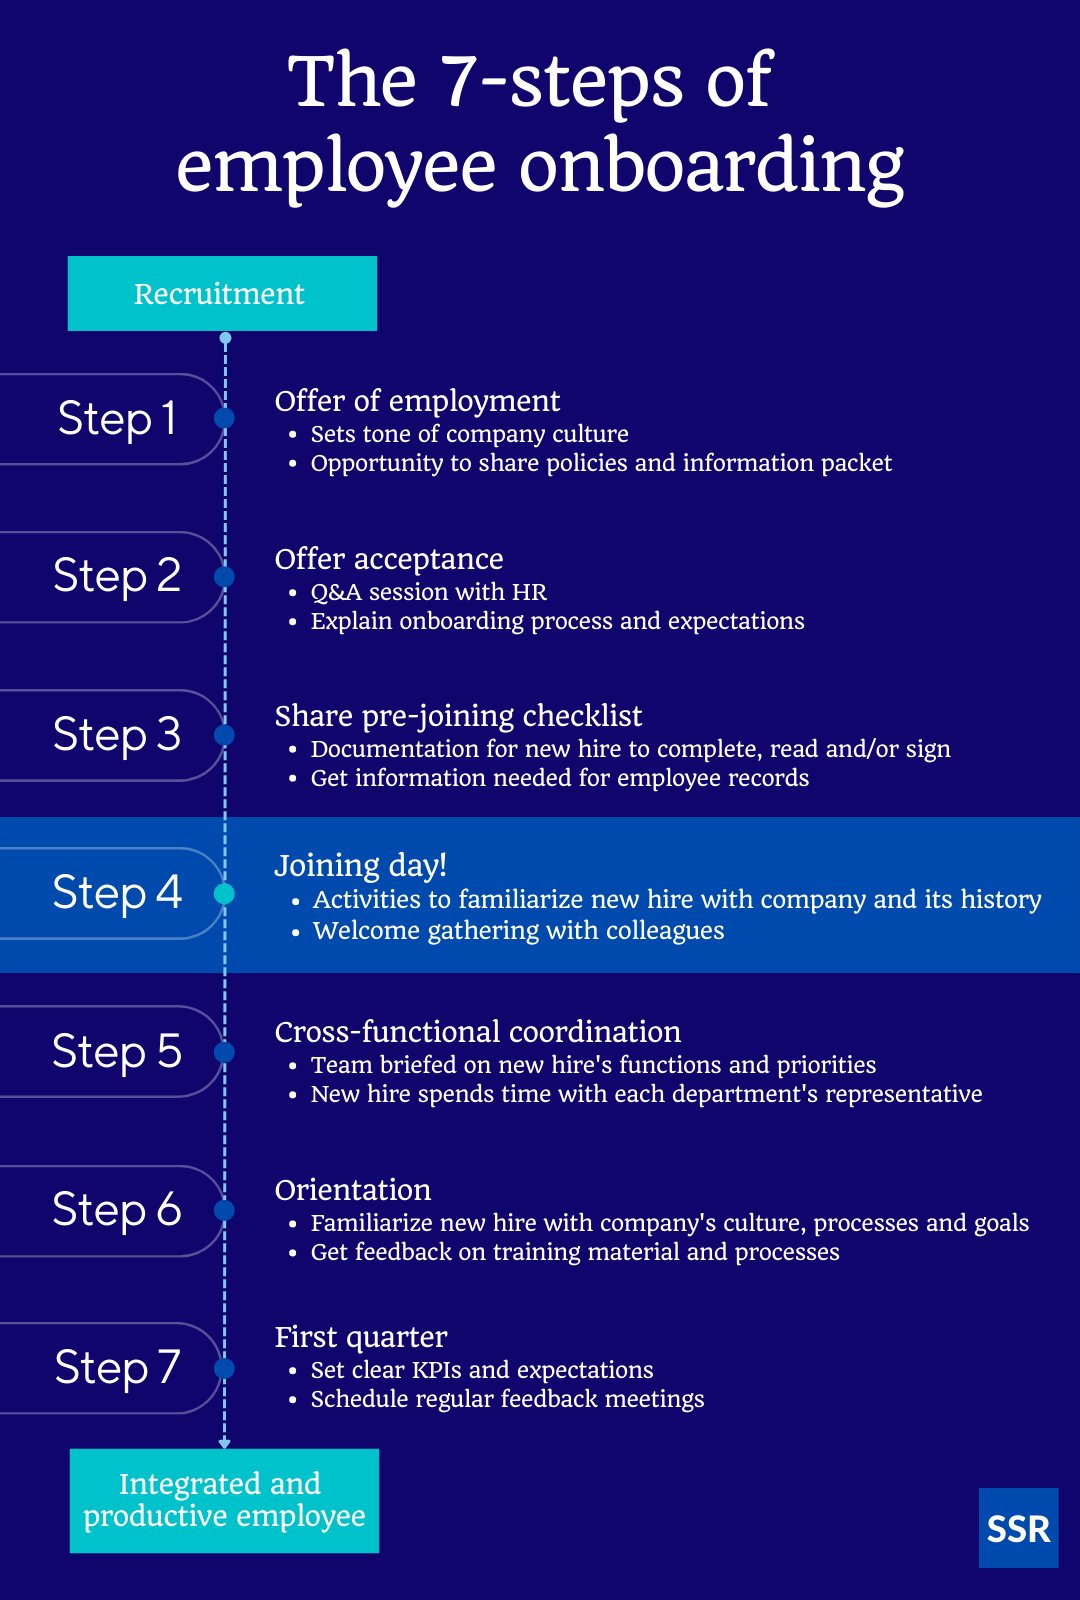 The steps of employee onboarding